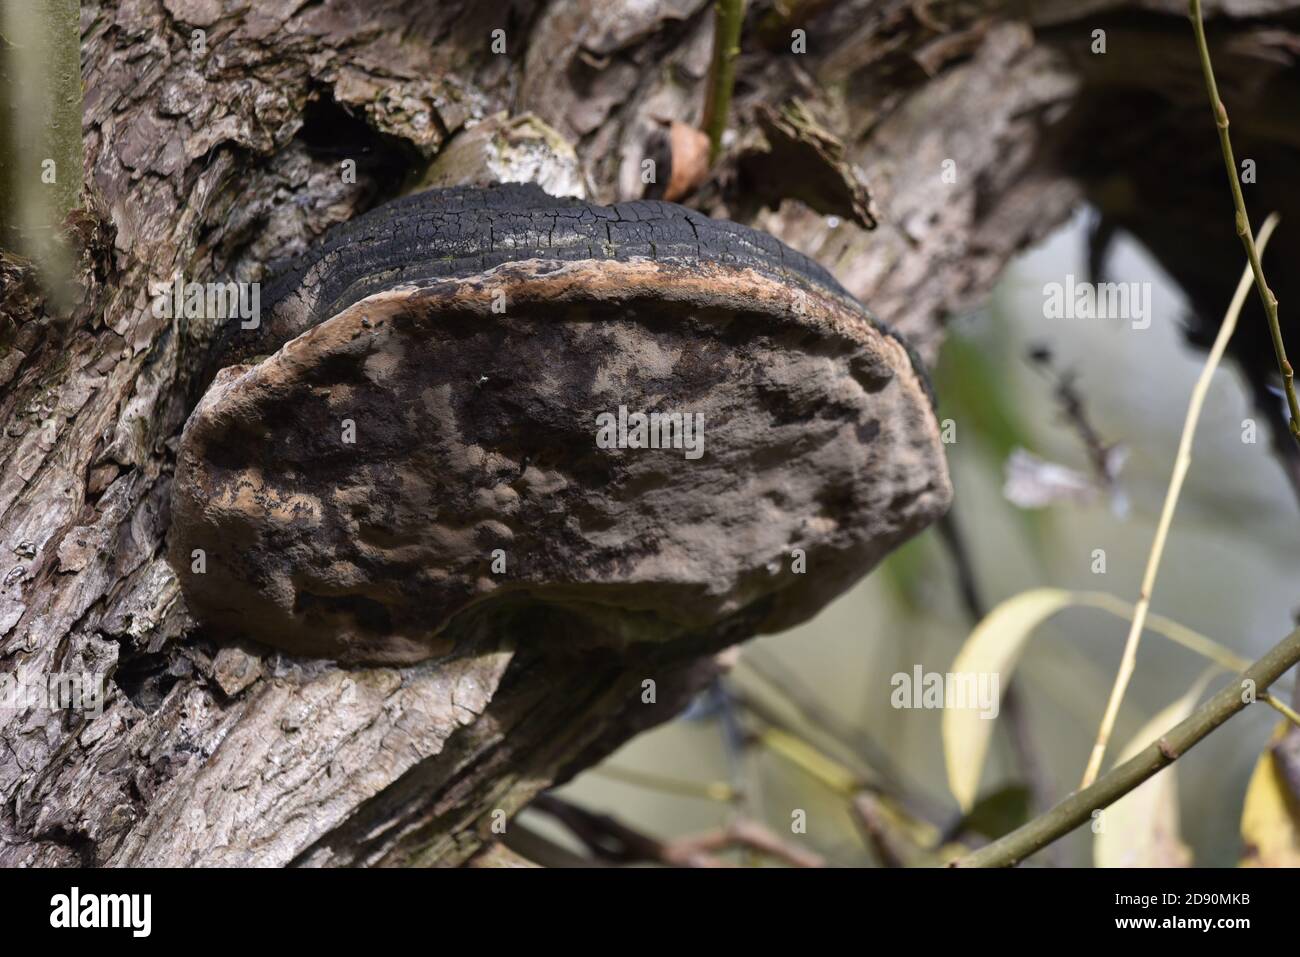 Close Up of Hoof Fungus, Fomes fomentarius, on Decaying Tree Trunk in a UK Nature Reserve Stock Photo